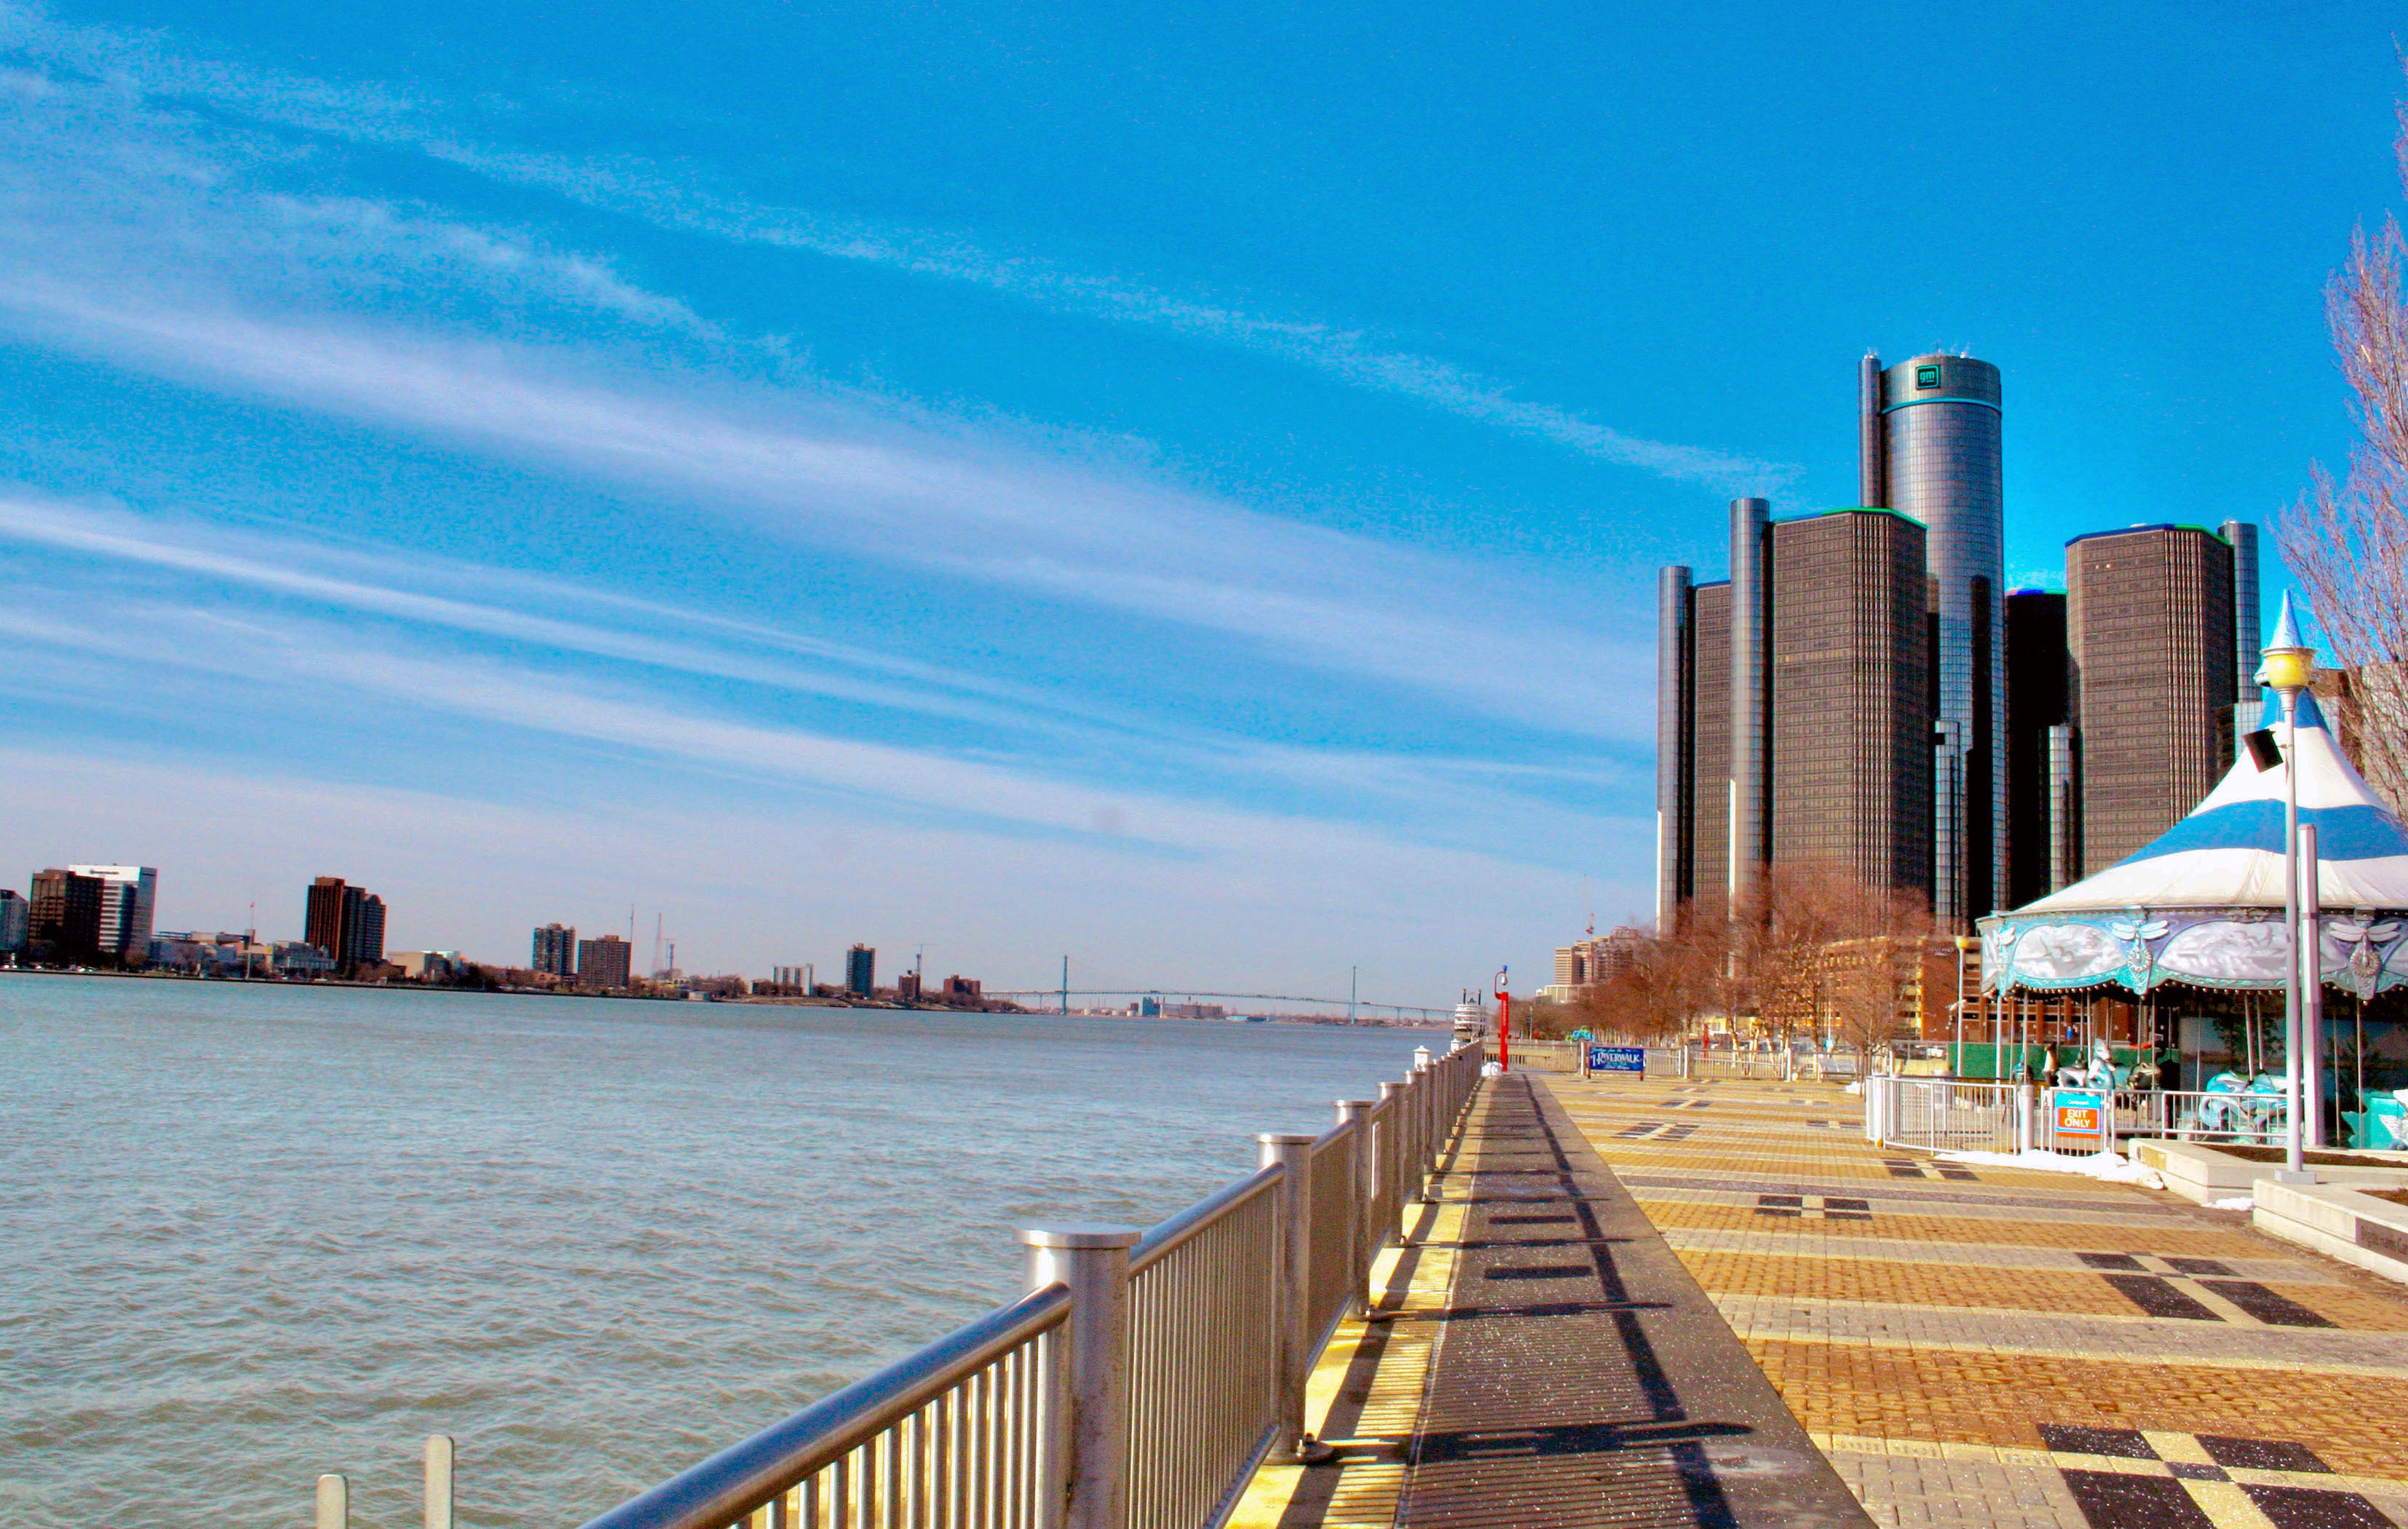 The Detroit Riverwalk on a cold morning. Photo by Zynab Al-Timimi